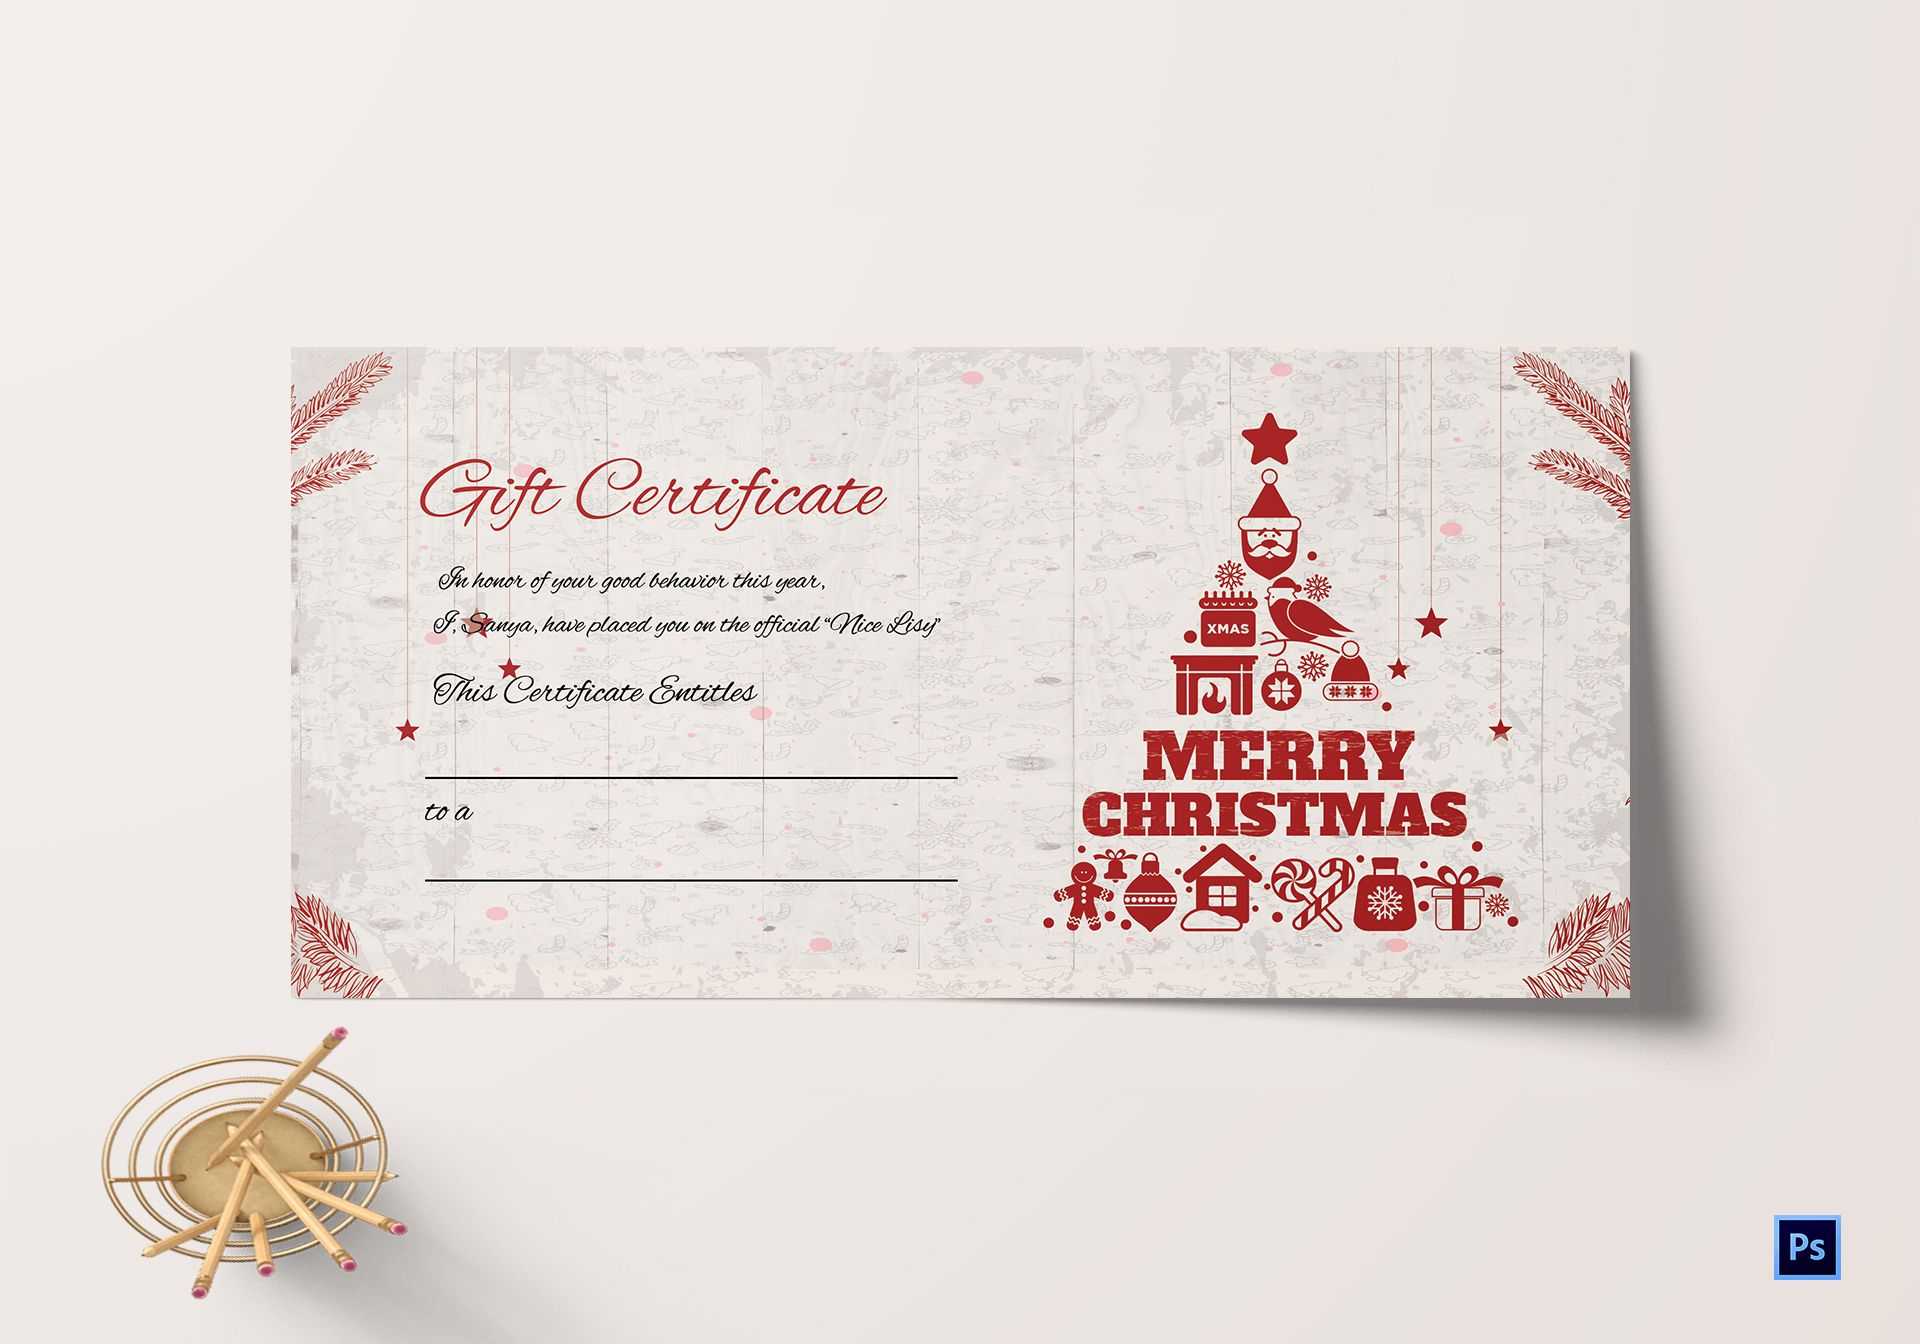 Merry Christmas Gift Certificate For Merry Christmas Gift Certificate Templates